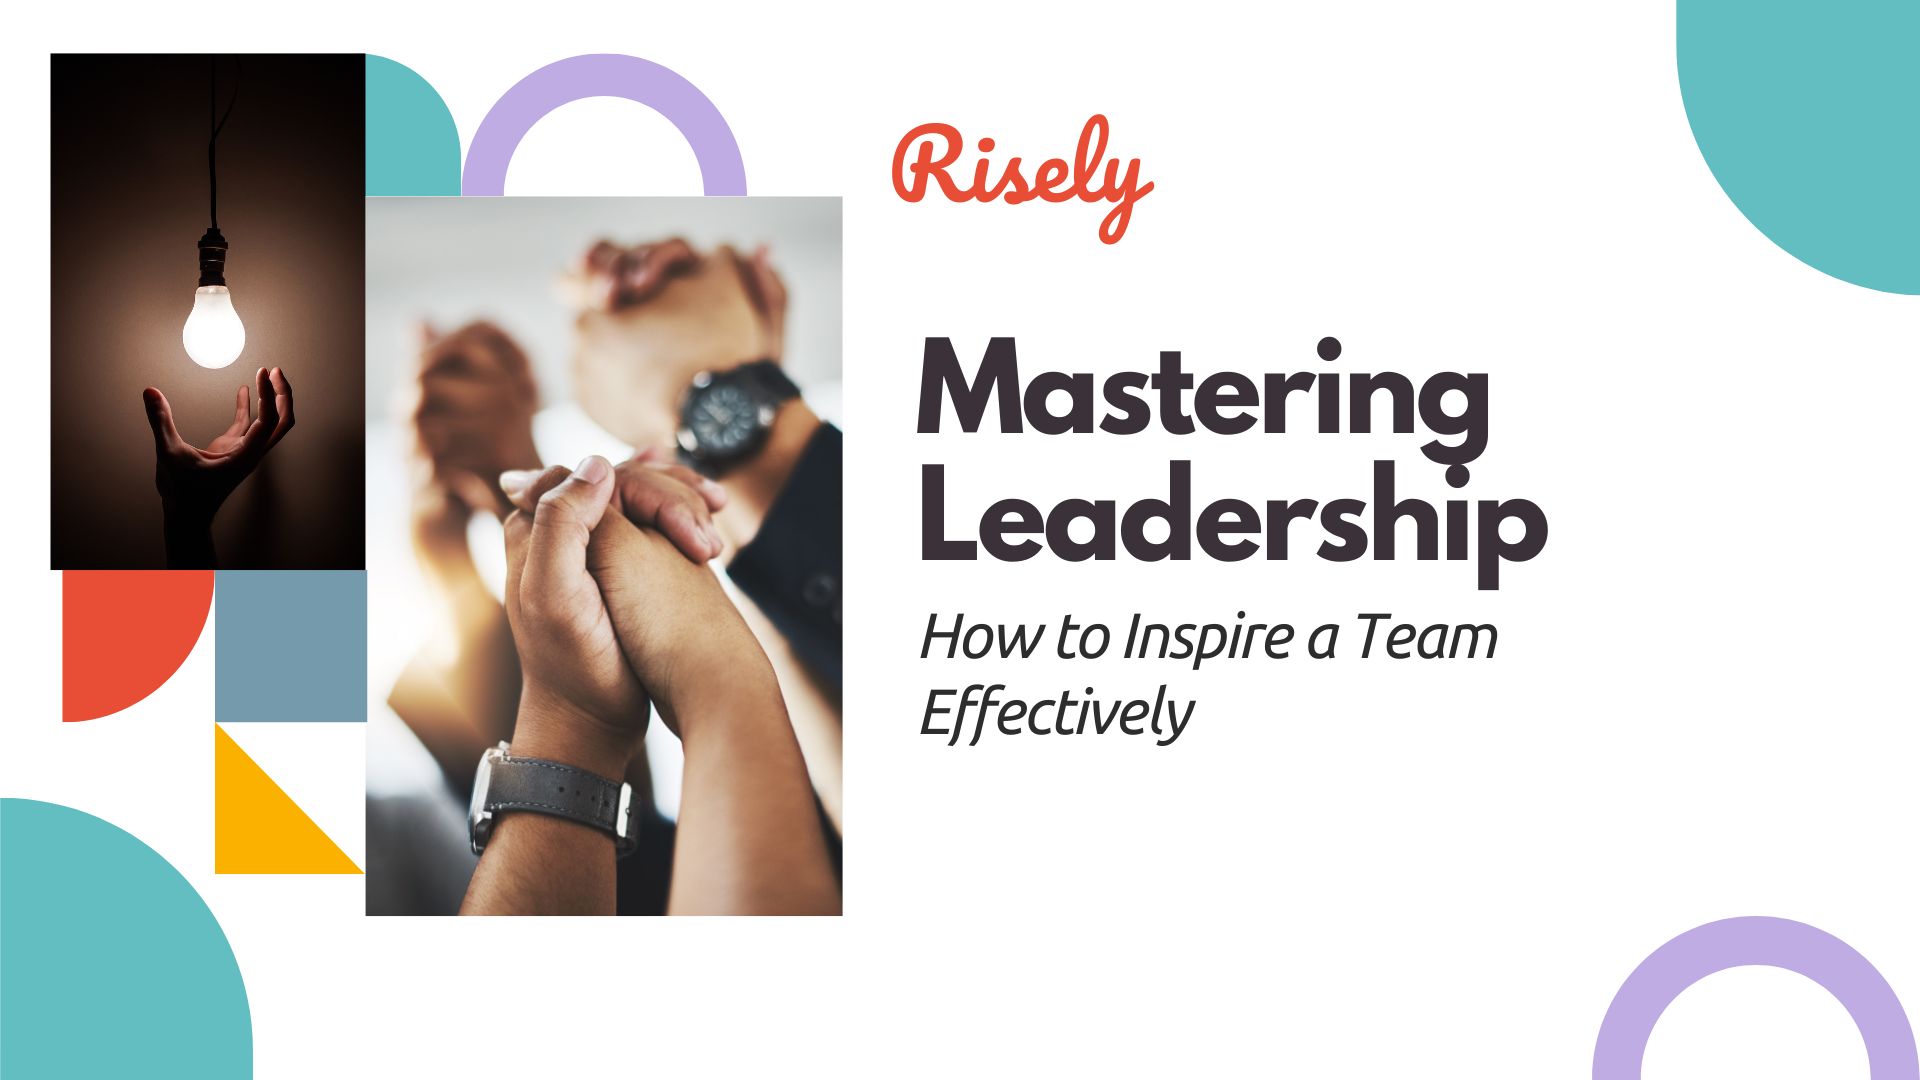 Mastering Leadership: How to Inspire a Team Effectively